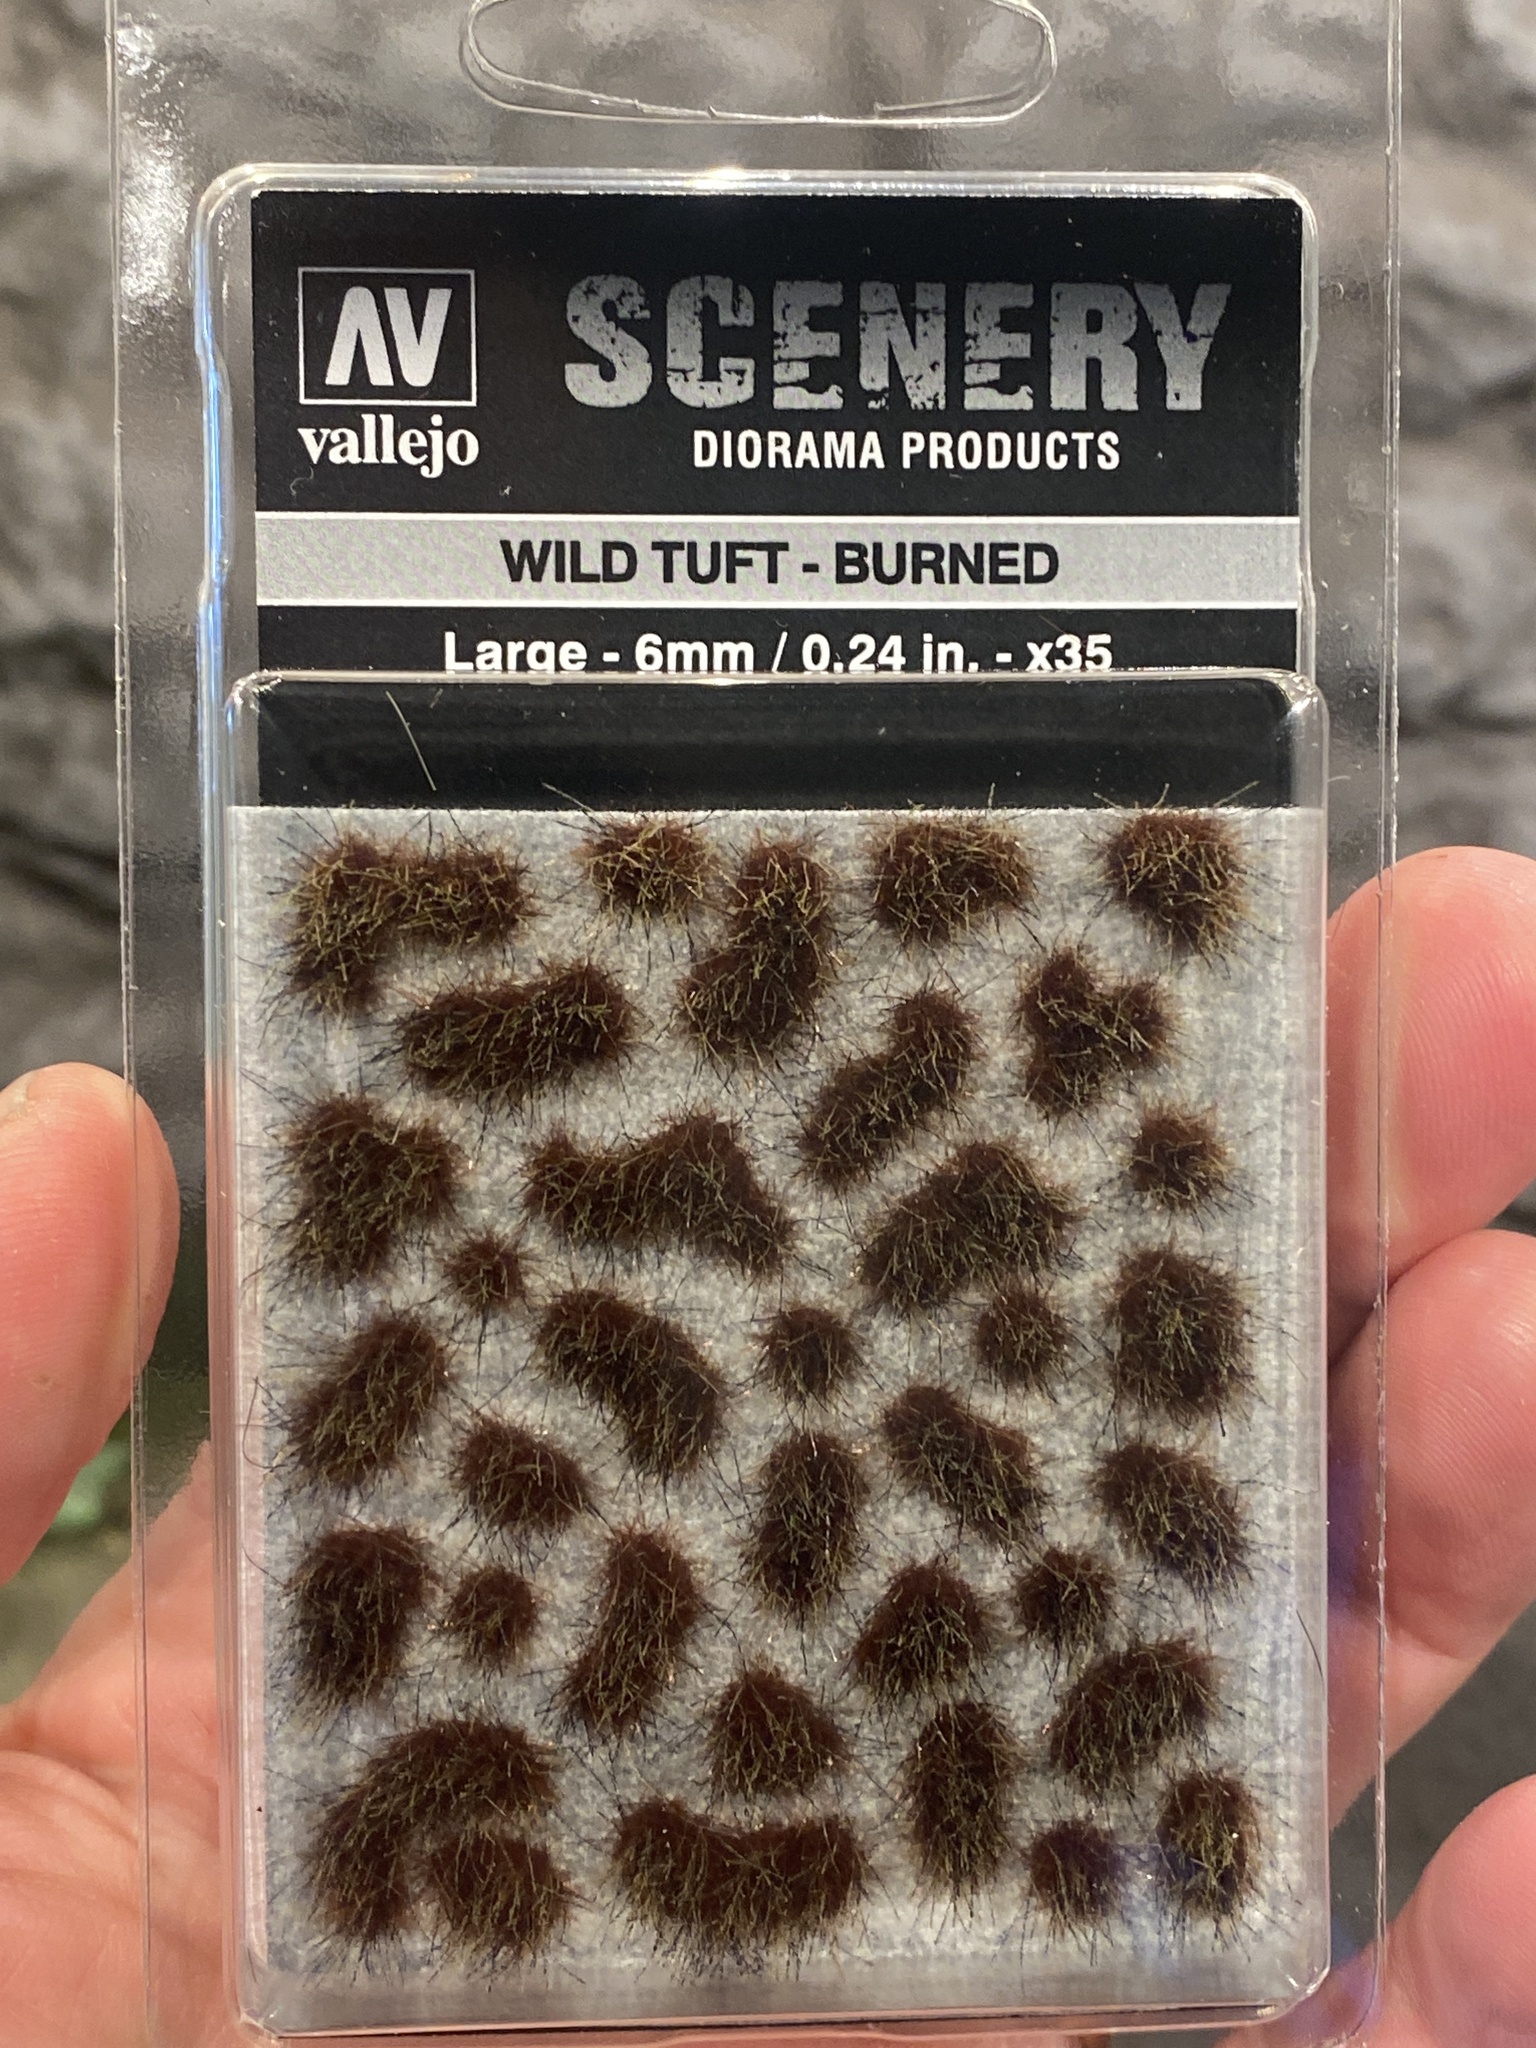 Scenery Diorama Products - Wild Tuft - Burned - Large  6 mm SC414 fr Vallejo